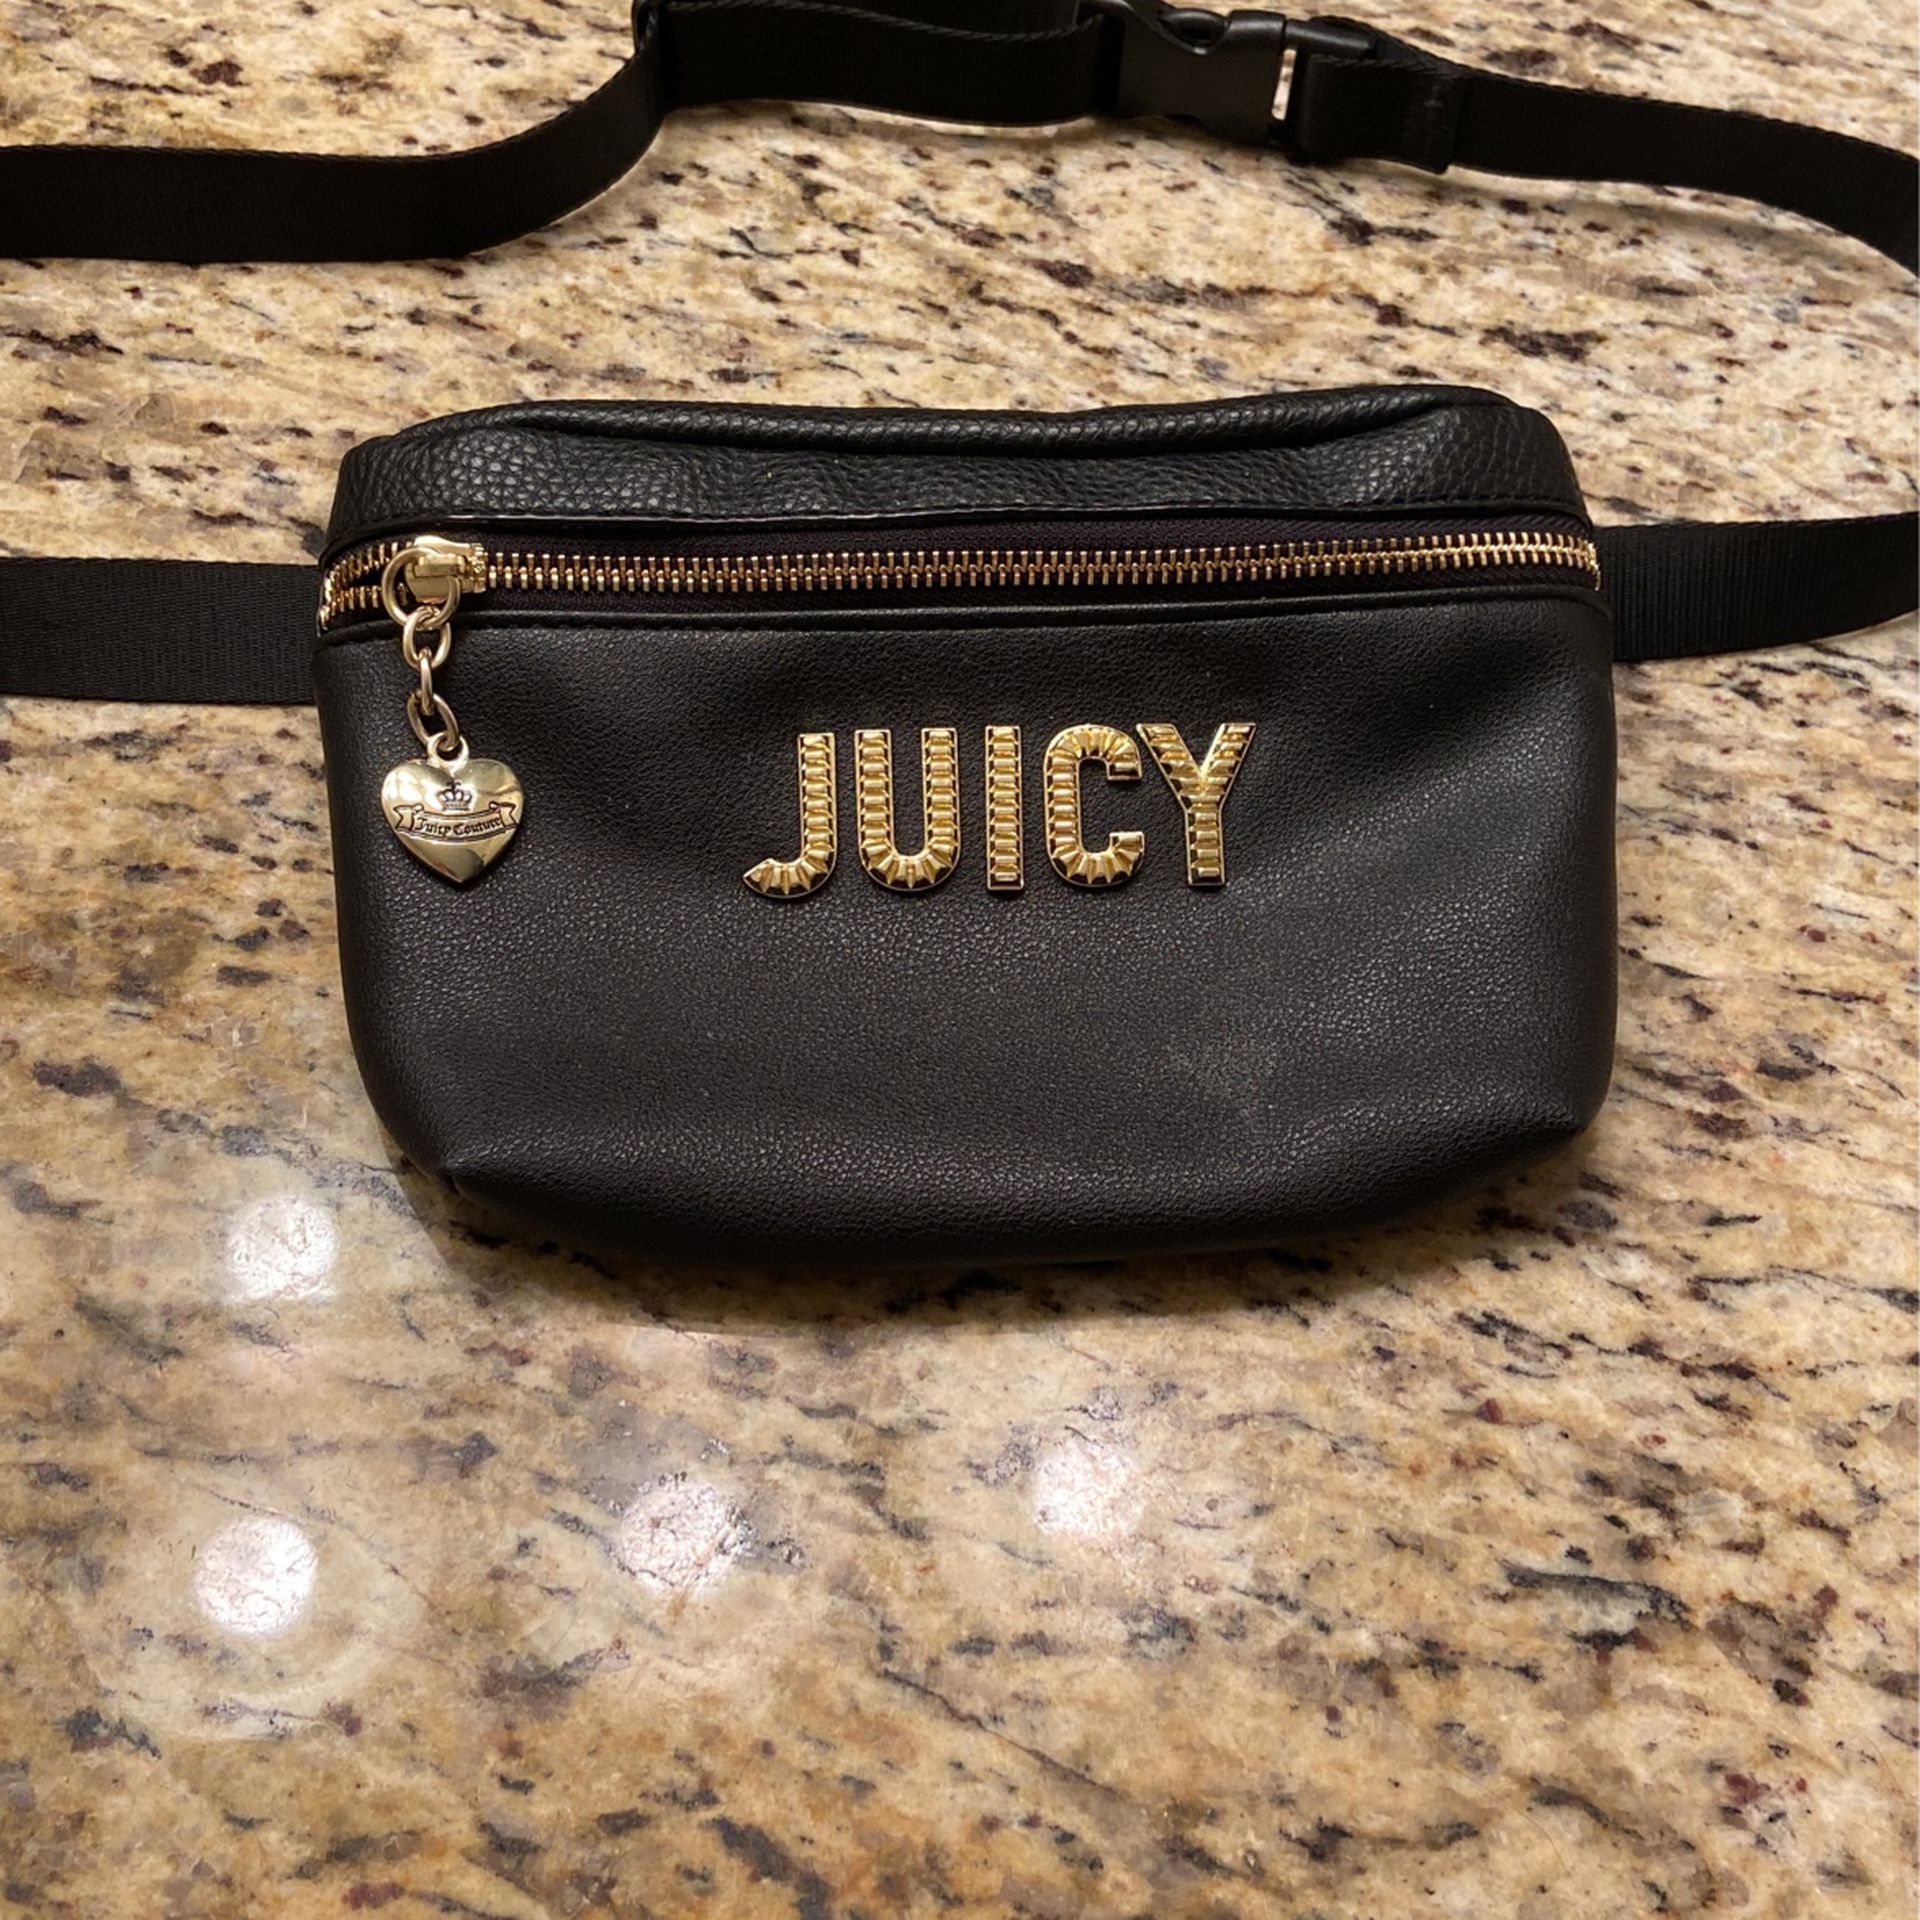 Brand New Juicy couture Fanny pack for Sale in Arlington, TX - OfferUp